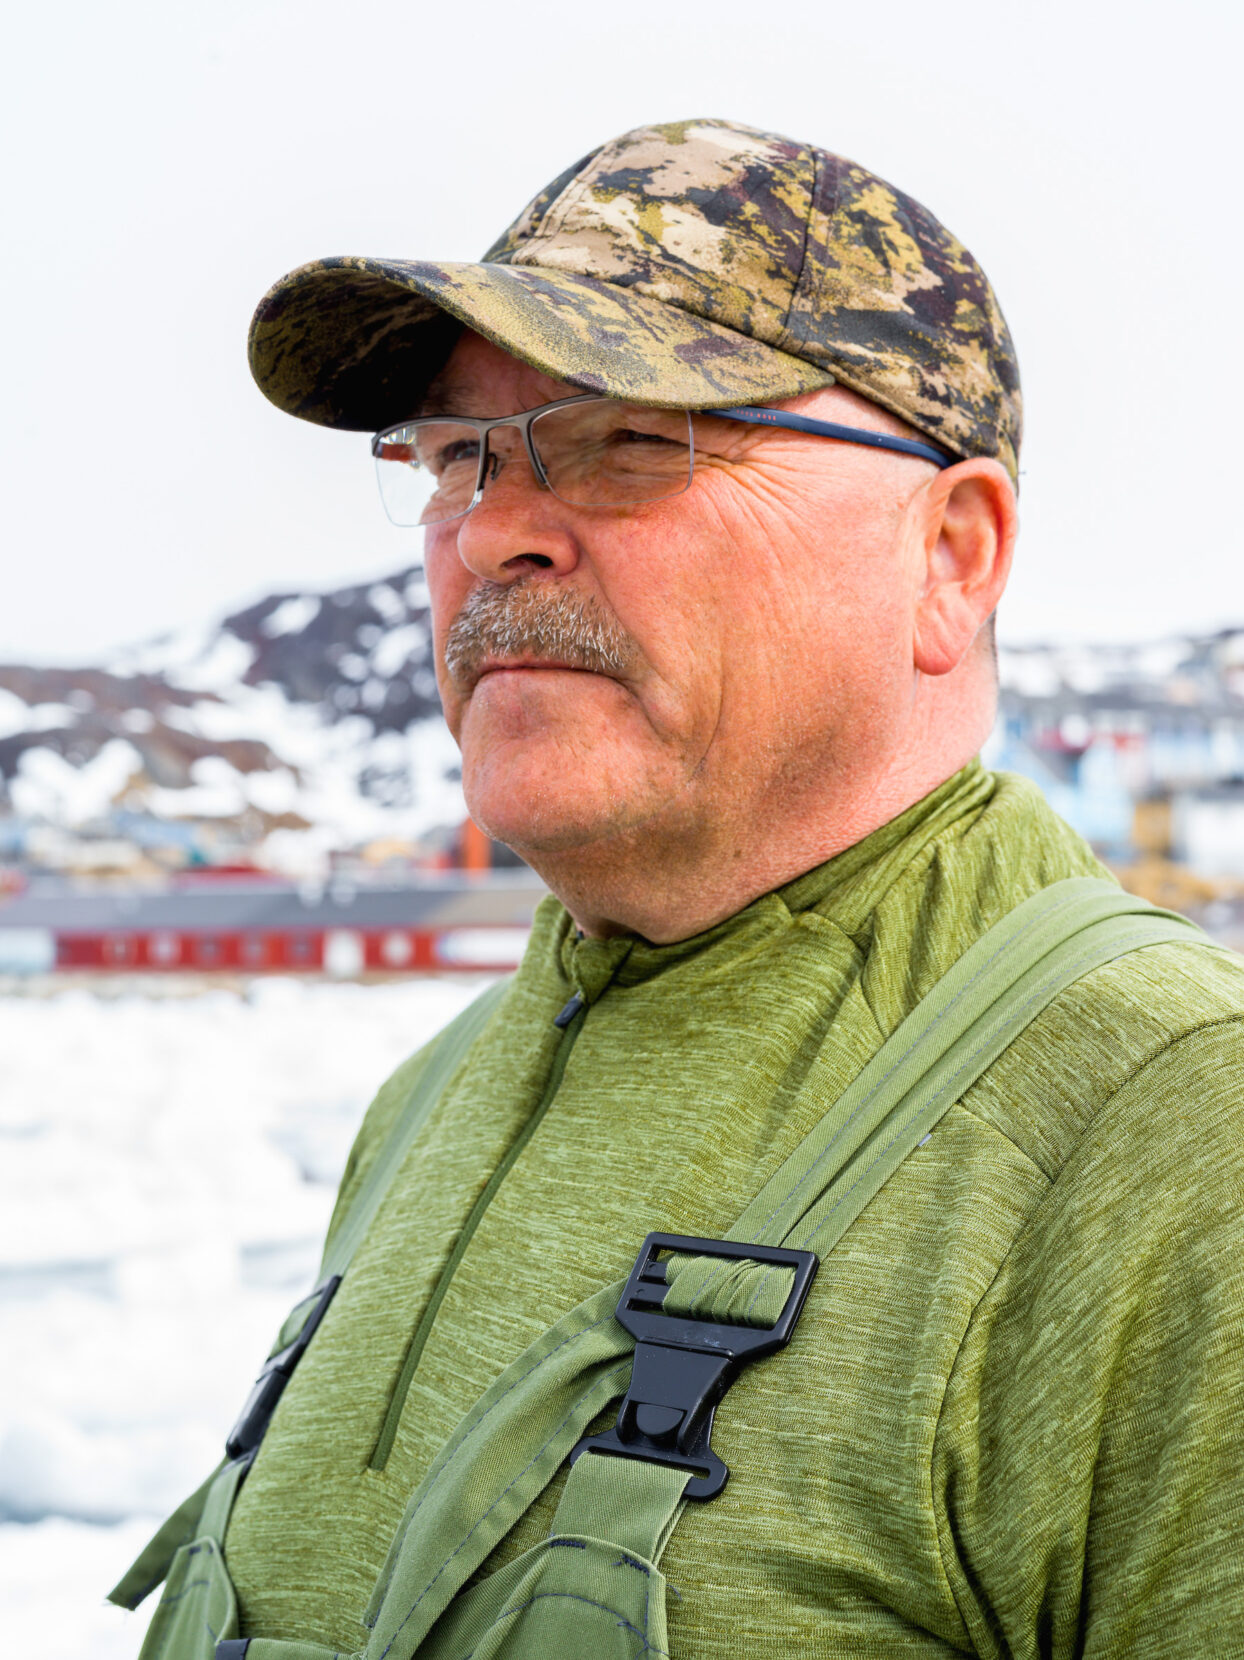 Portrait of a man with a mustache, glasses, and camouflage cap staring into the distance, with a snowy landscape and icy waters behind him.